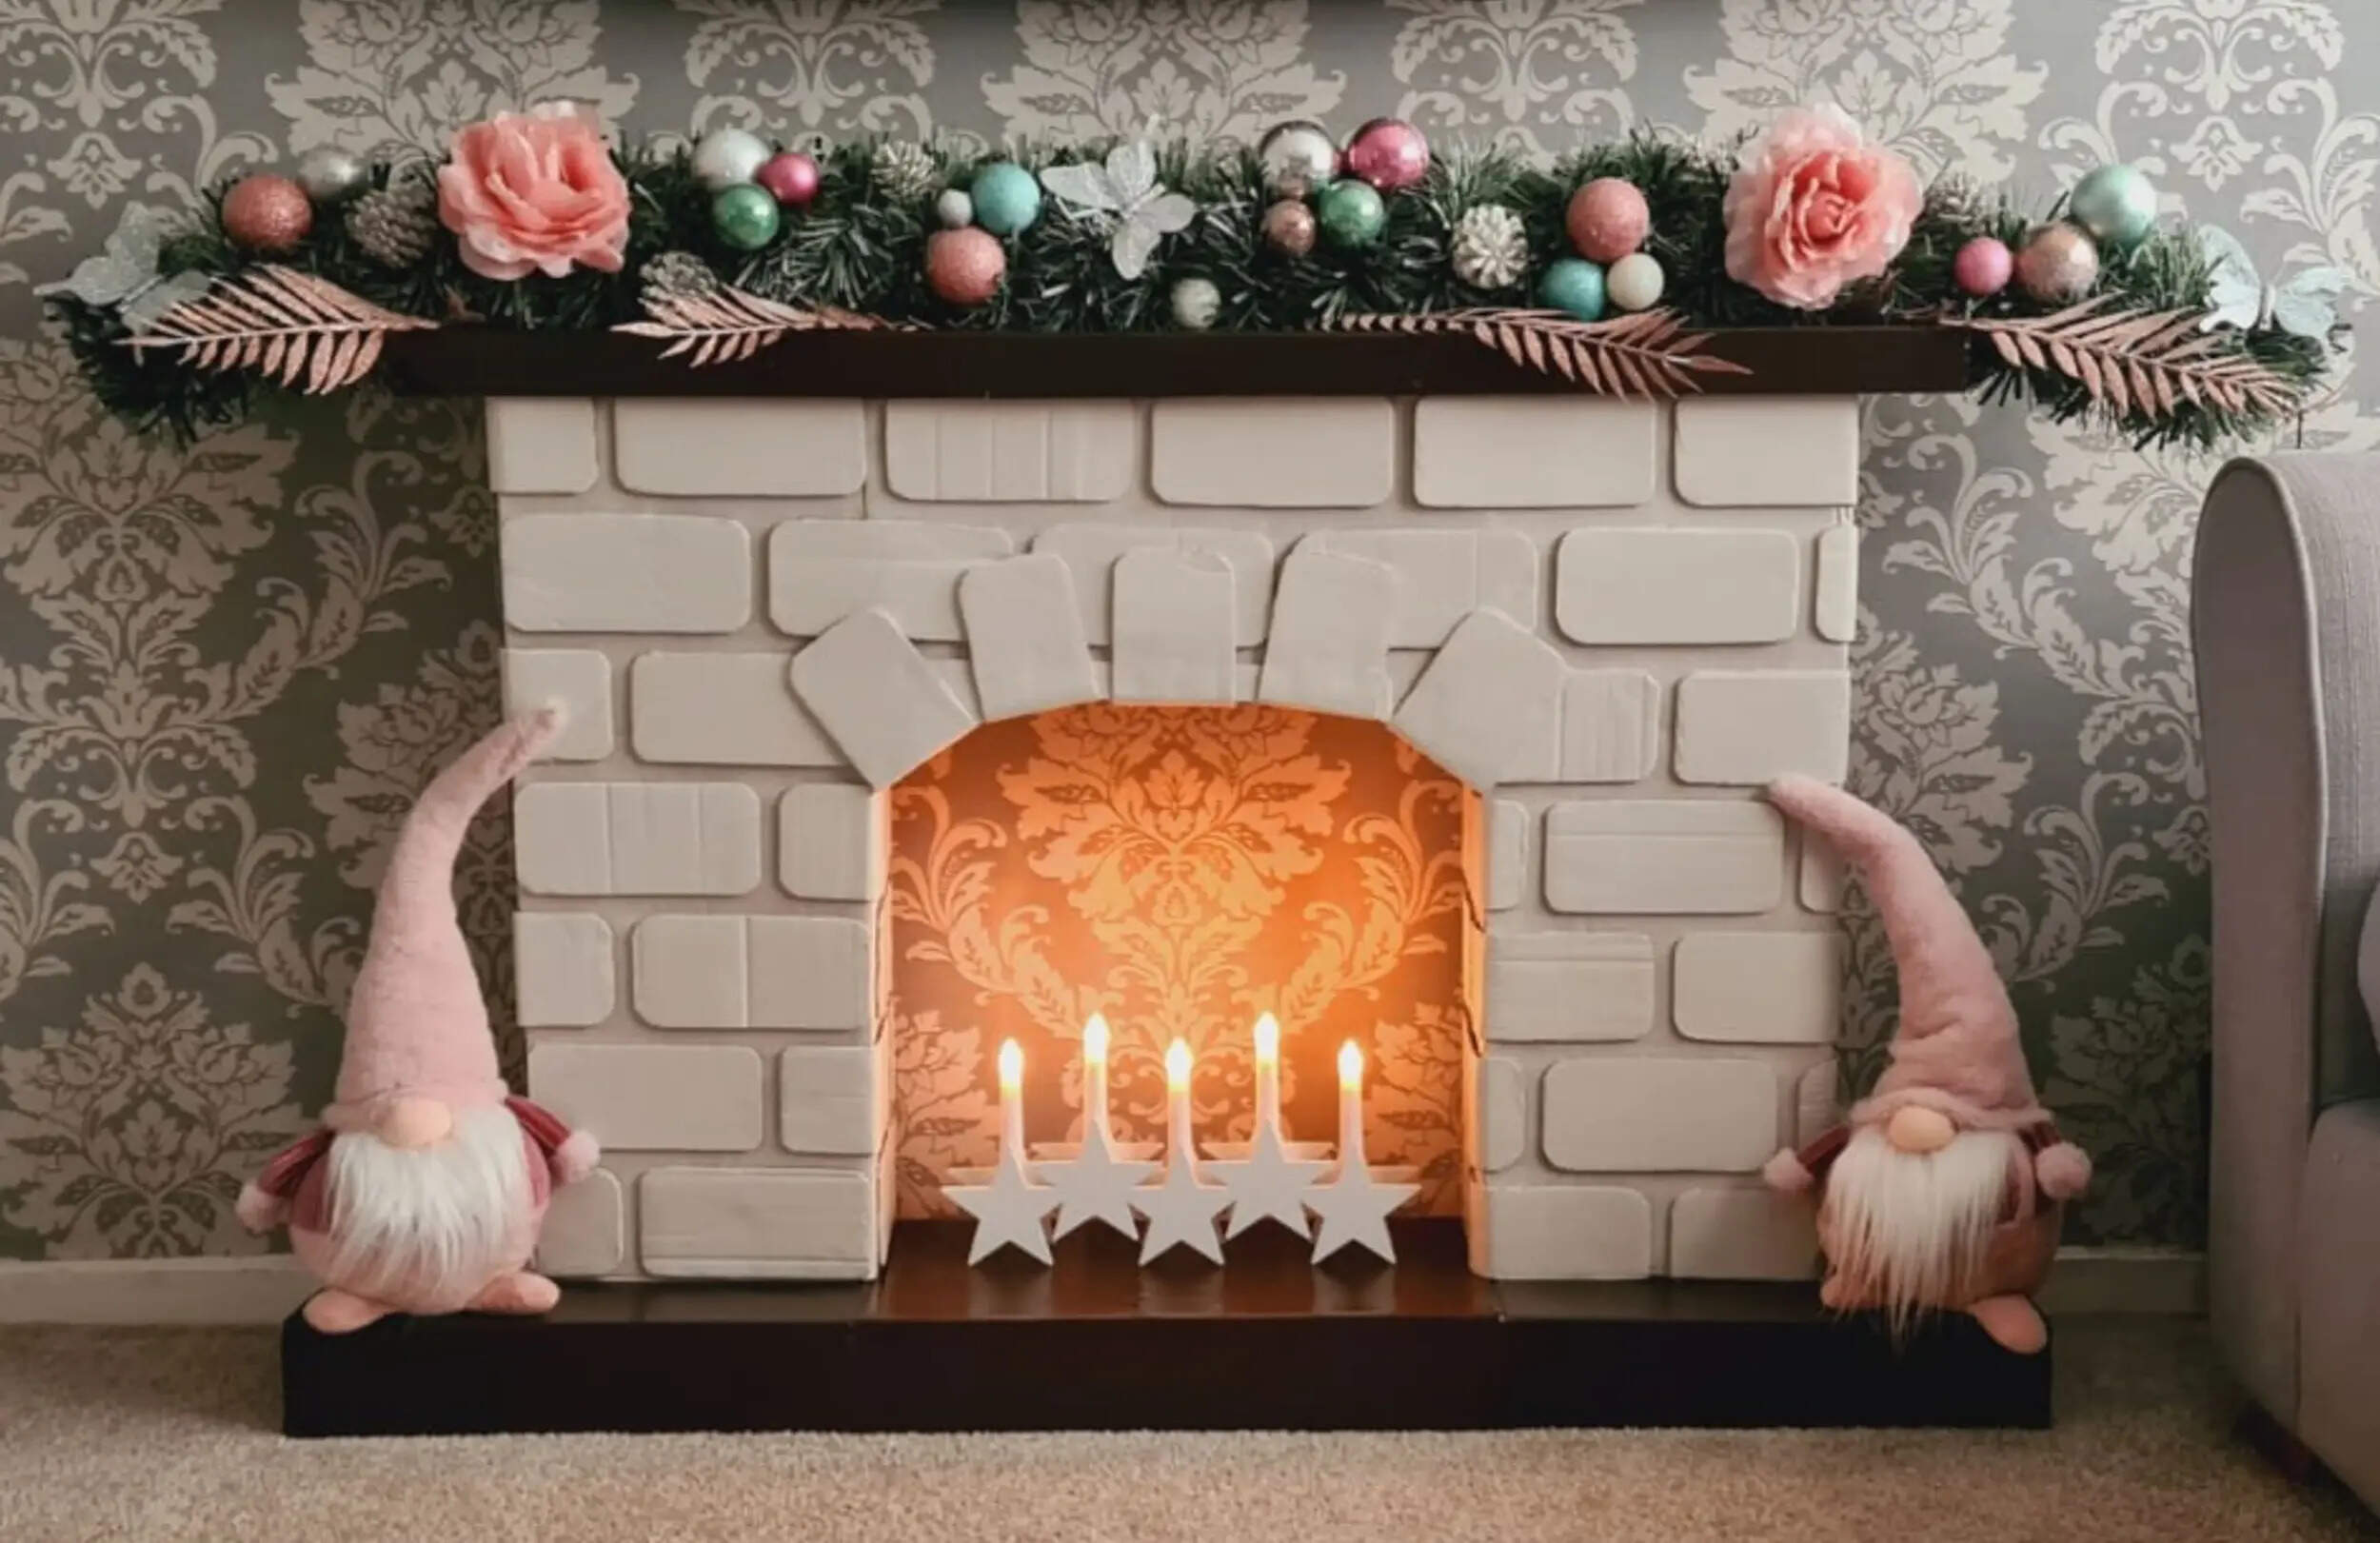 How To Make A Cardboard Chimney